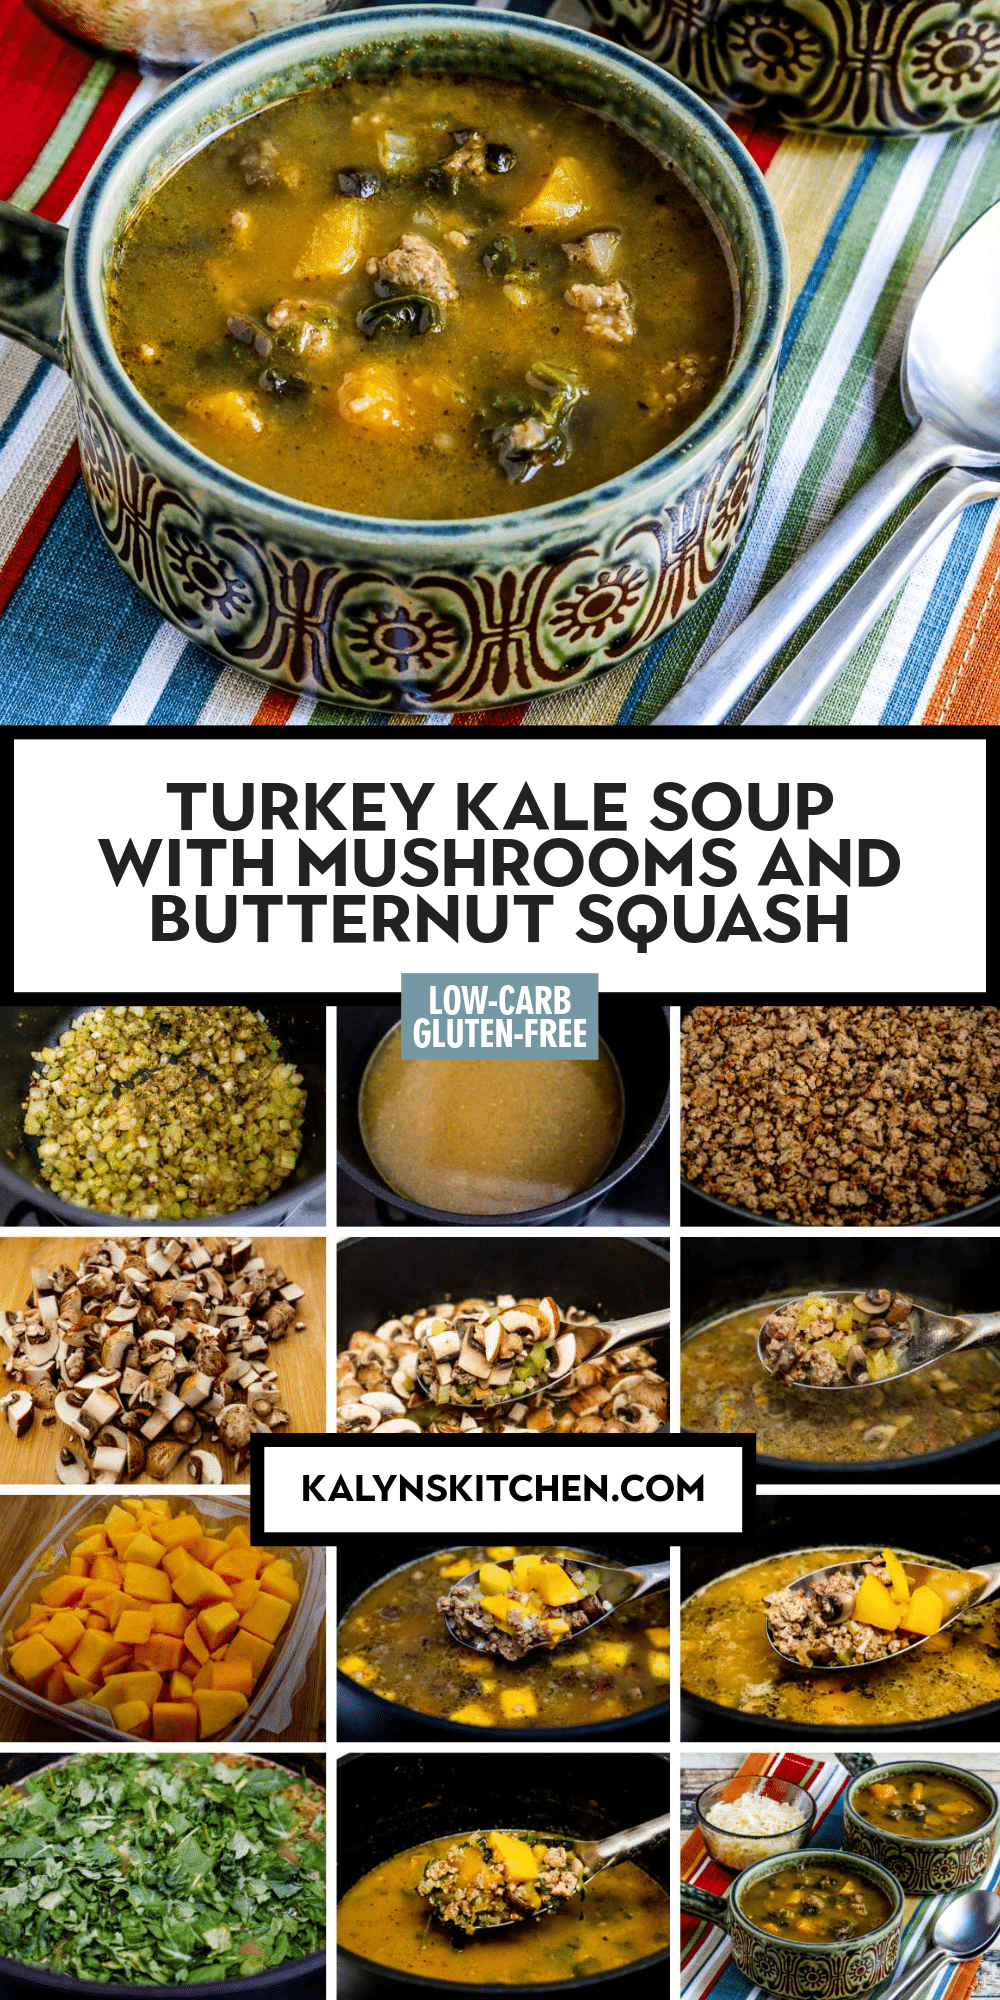 Pinterest image of Turkey Kale Soup with Mushrooms and Butternut Squash